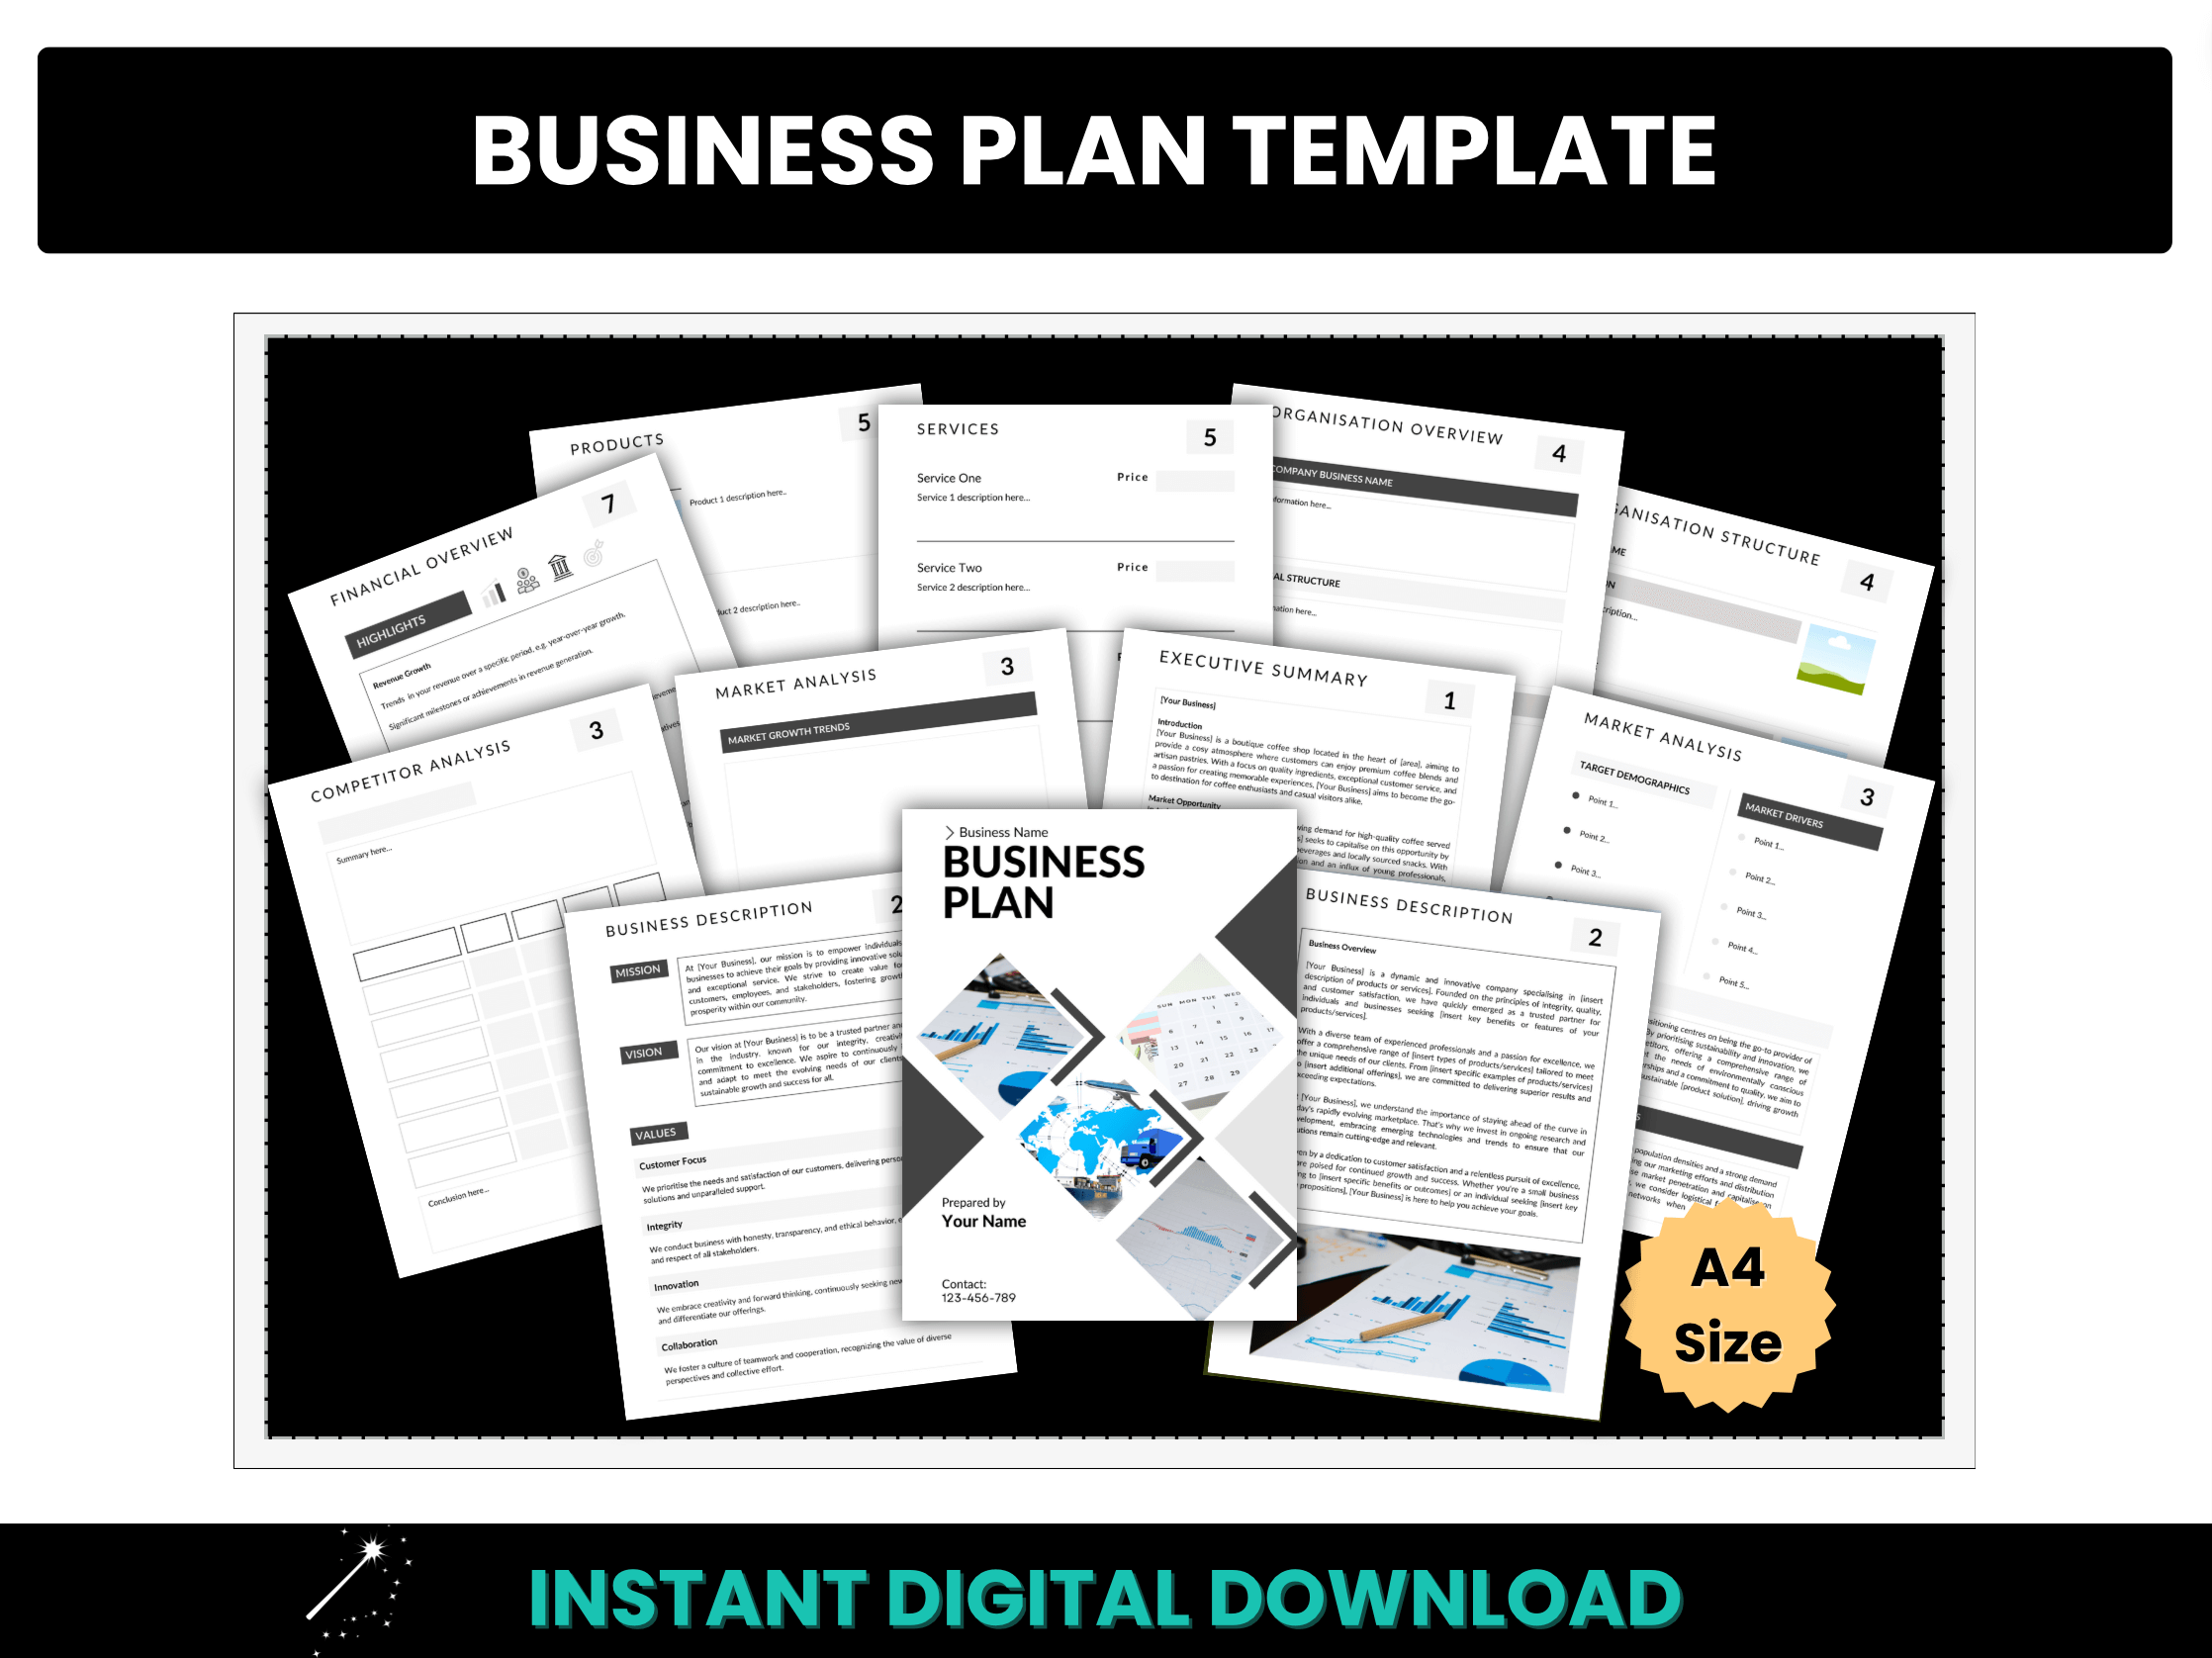 Business Plan Template - A4 Size 